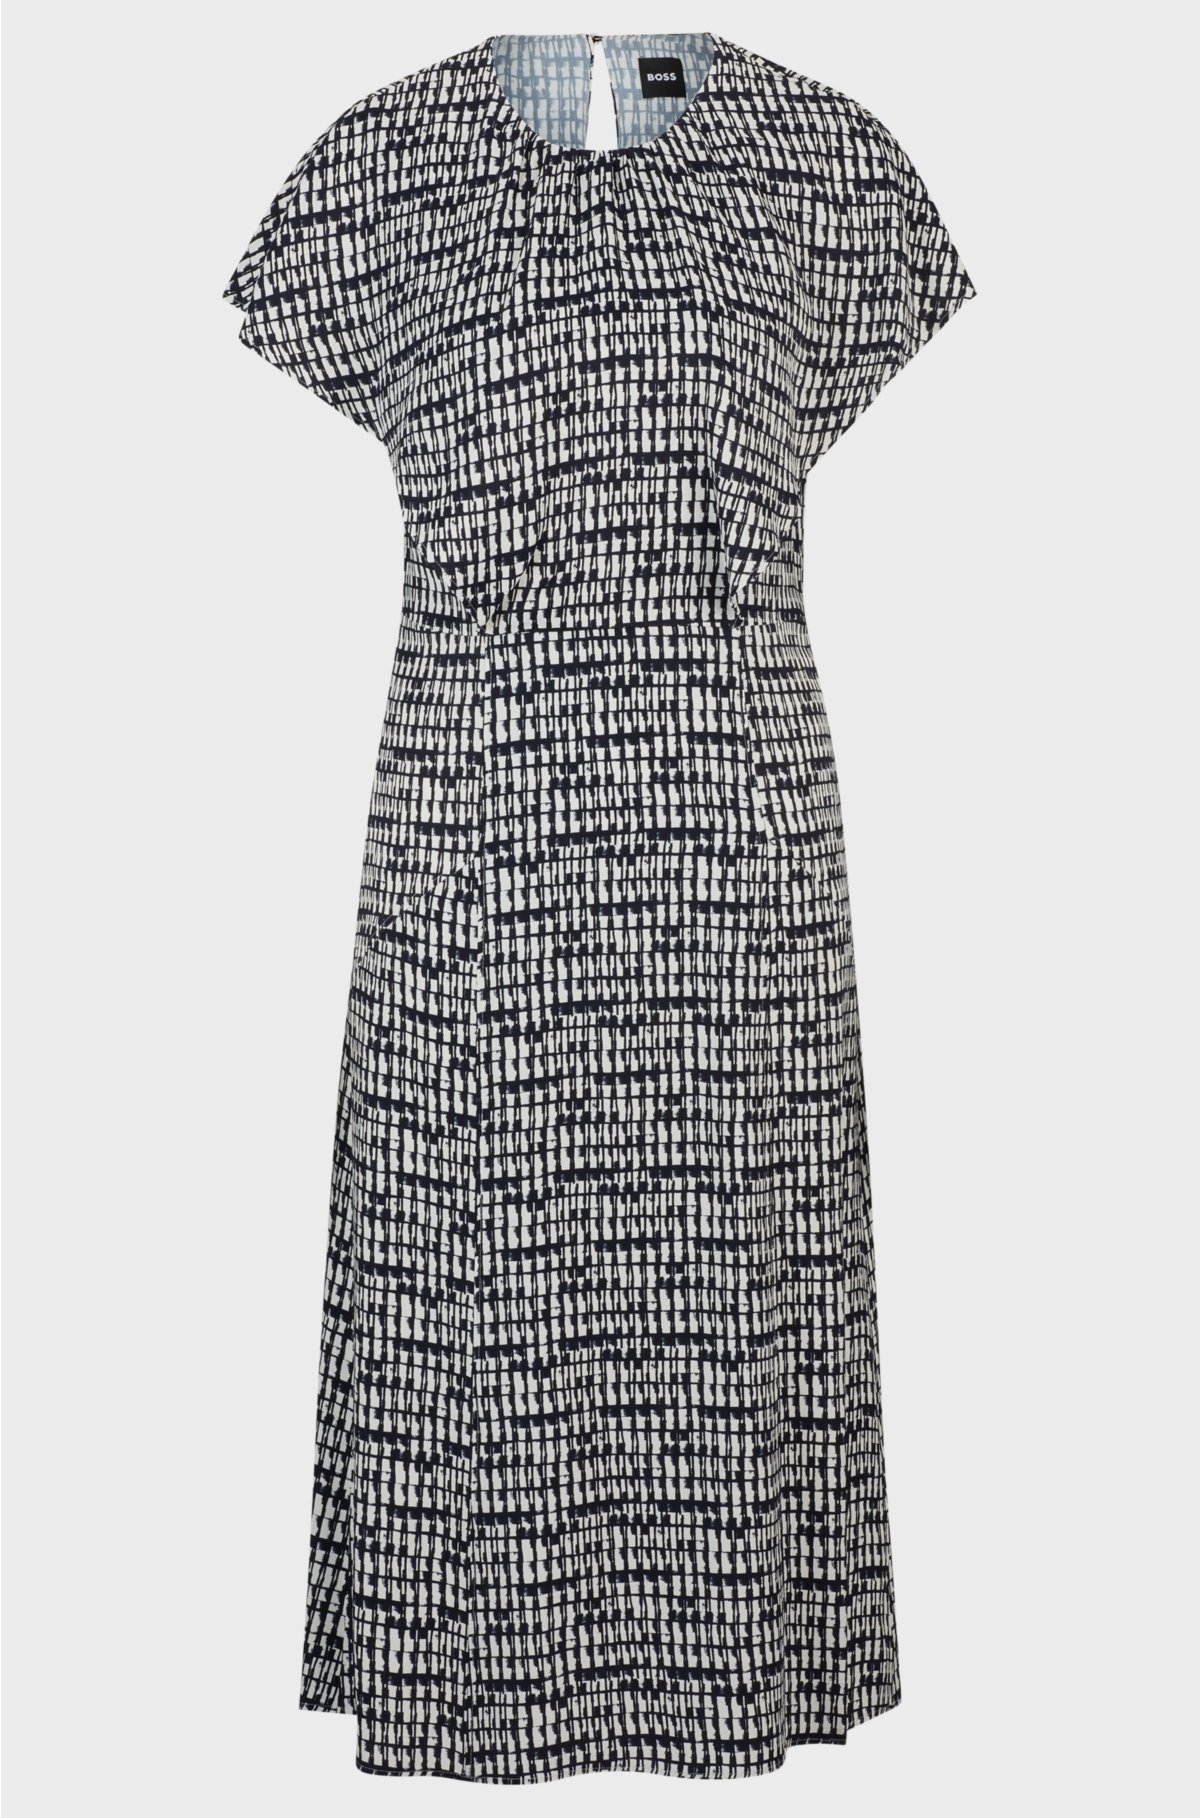 Short-sleeved dress in abstract-patterned fabric, Patterned